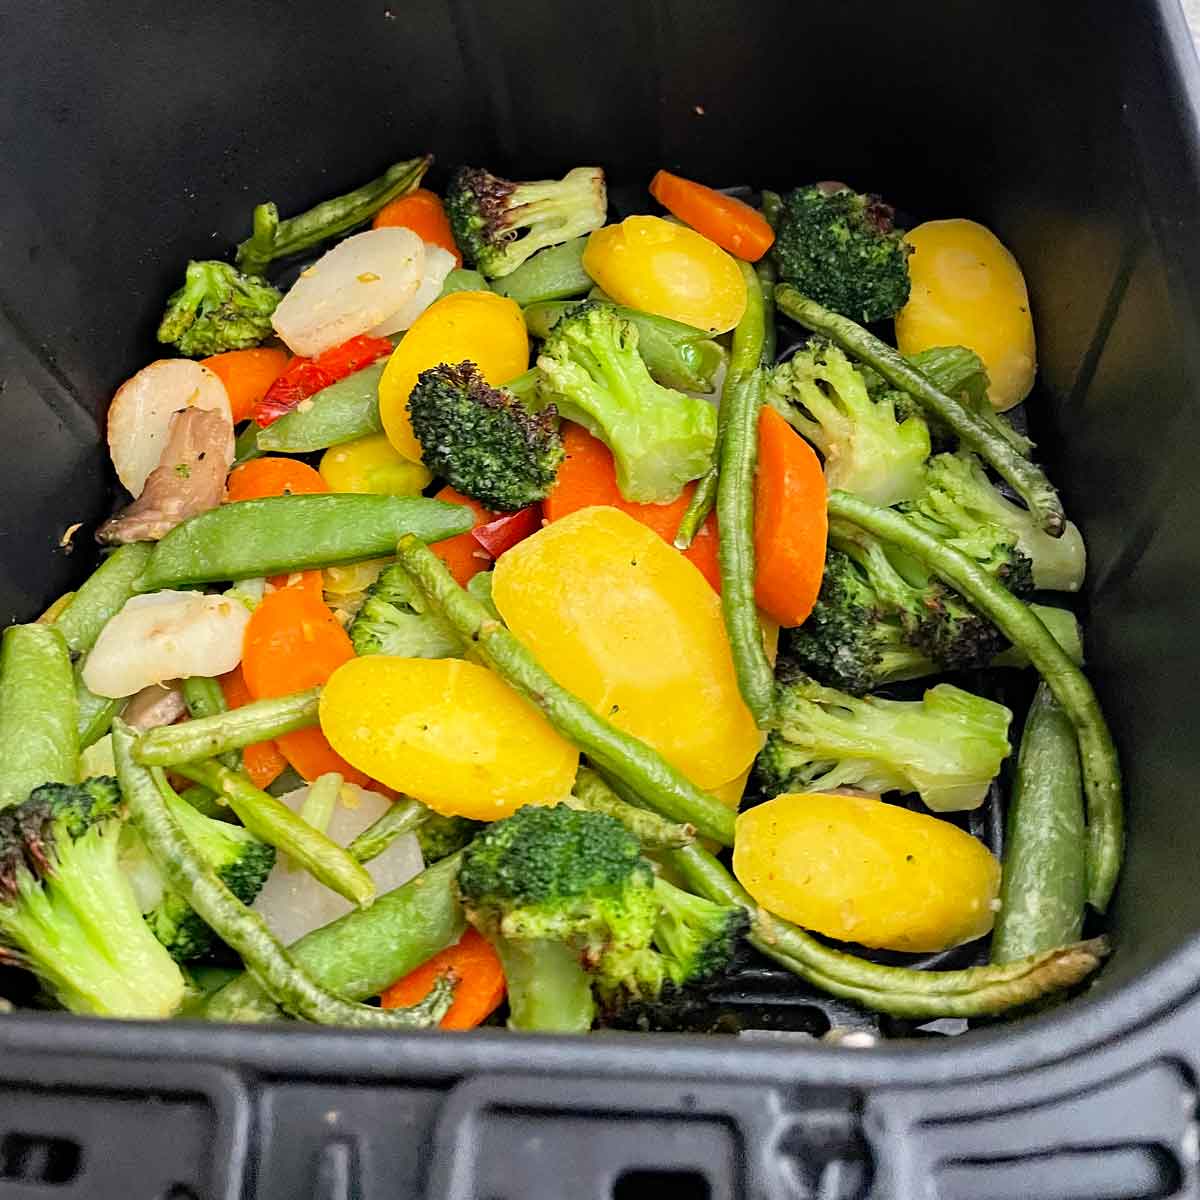 Cooked mix veg in air fryer basket.